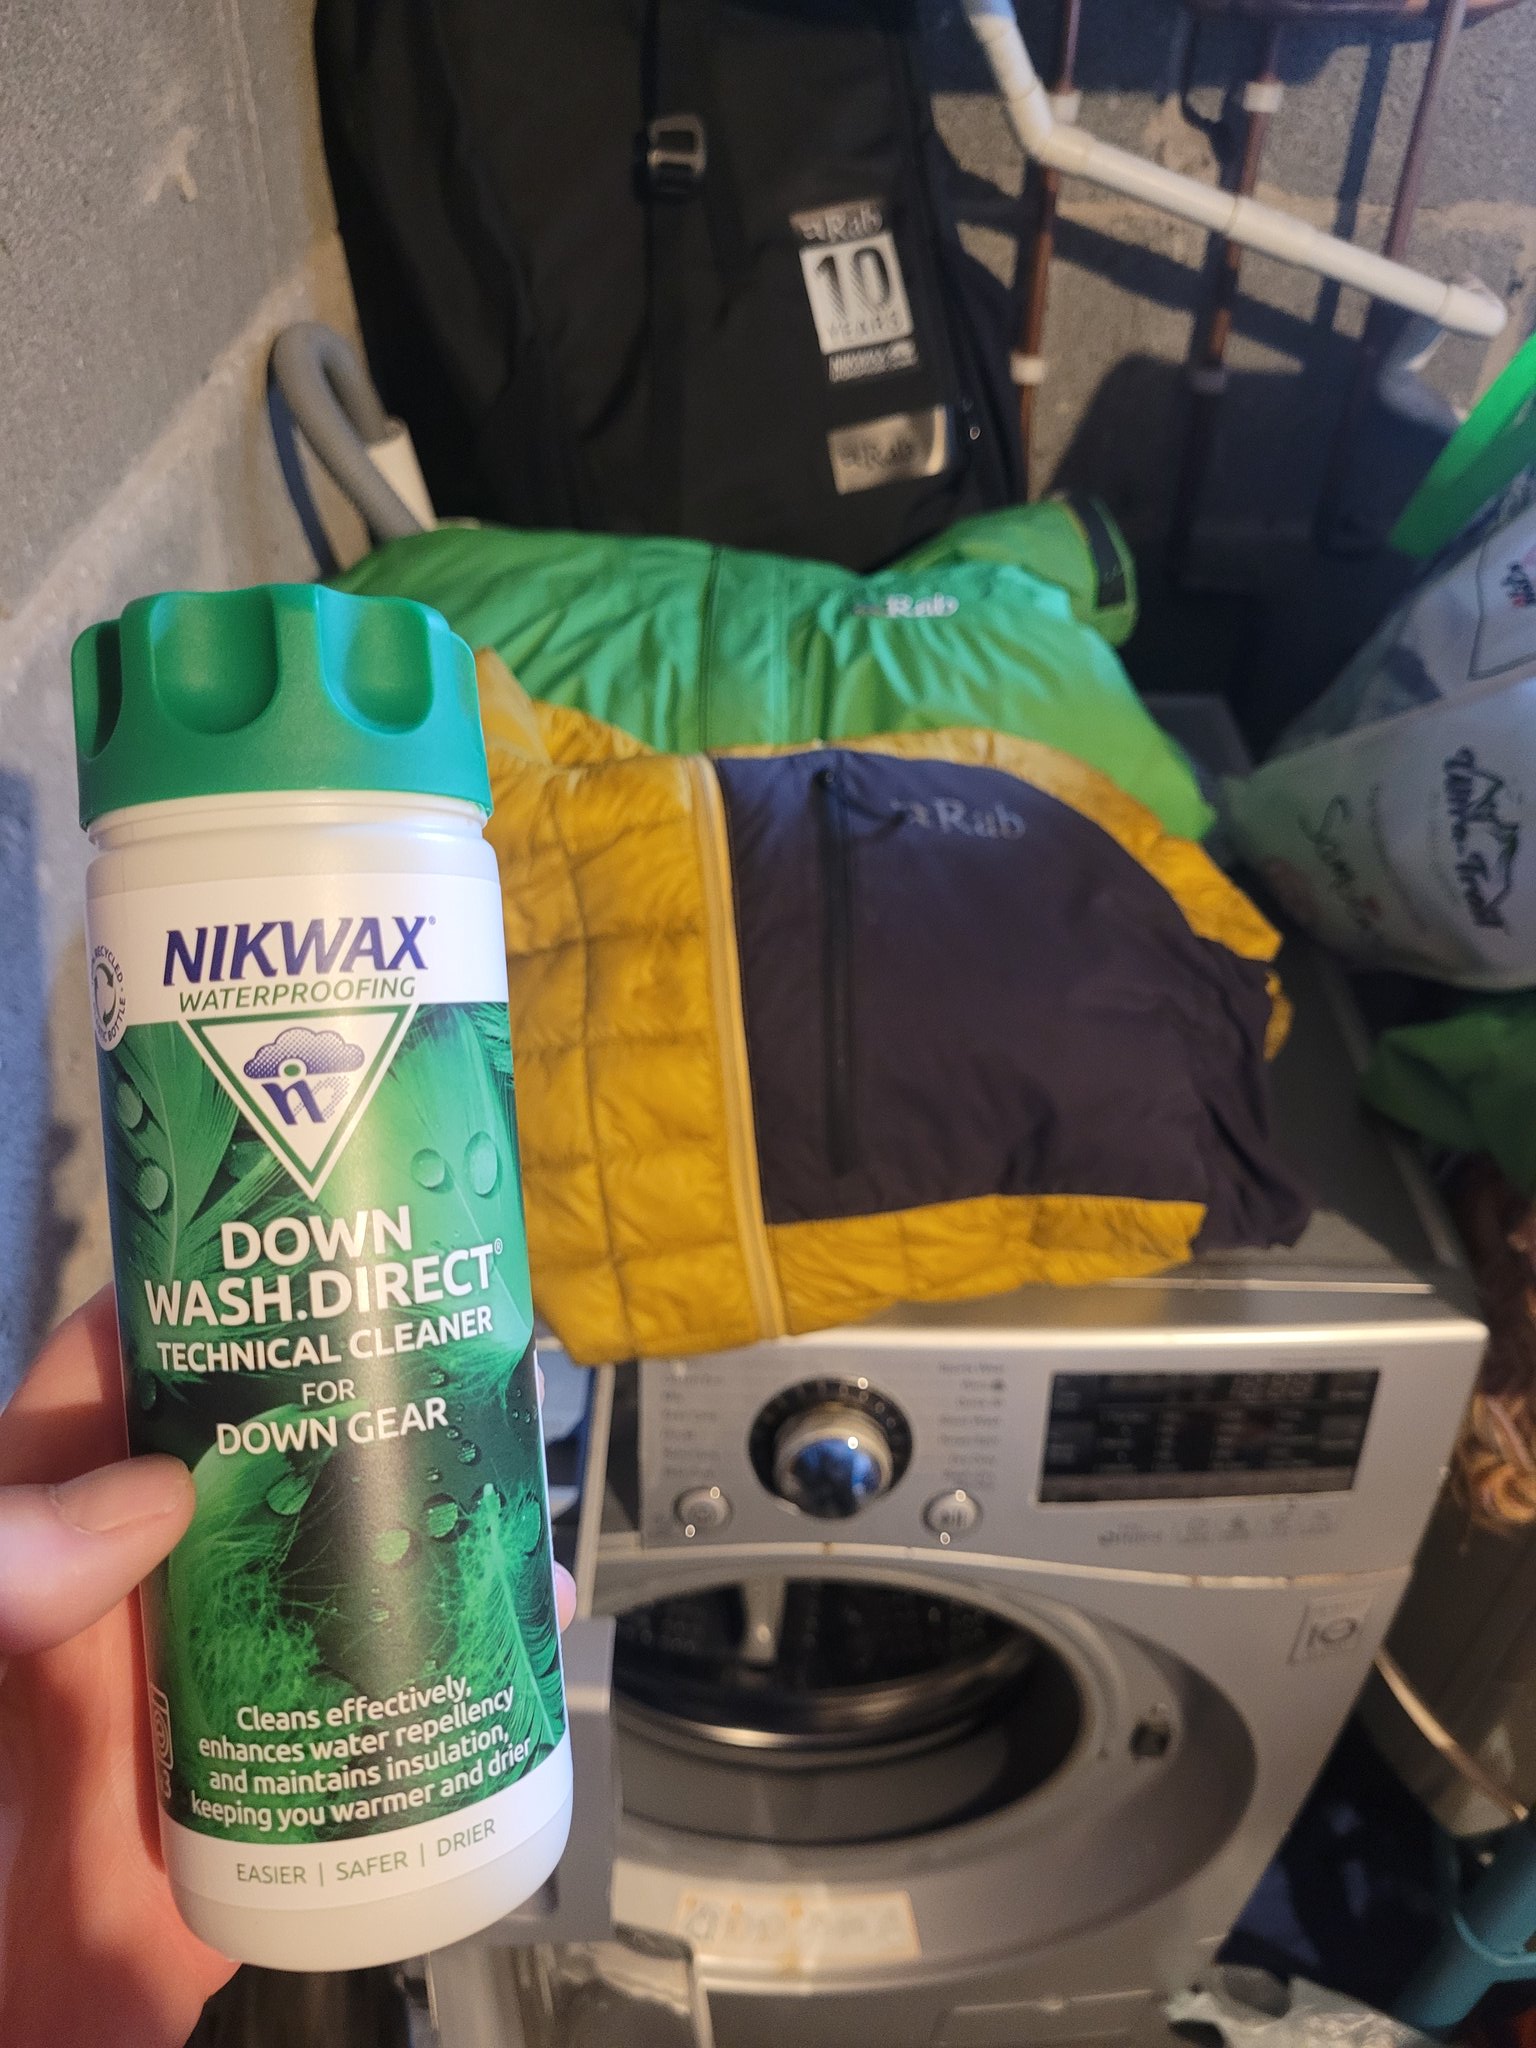 Calum Muskett on X: Just washed and re-proofed my old down jackets with  @nikwax was and re-proof. Fluorocarbon free and has an amazing restorative  effect on the jackets!  / X